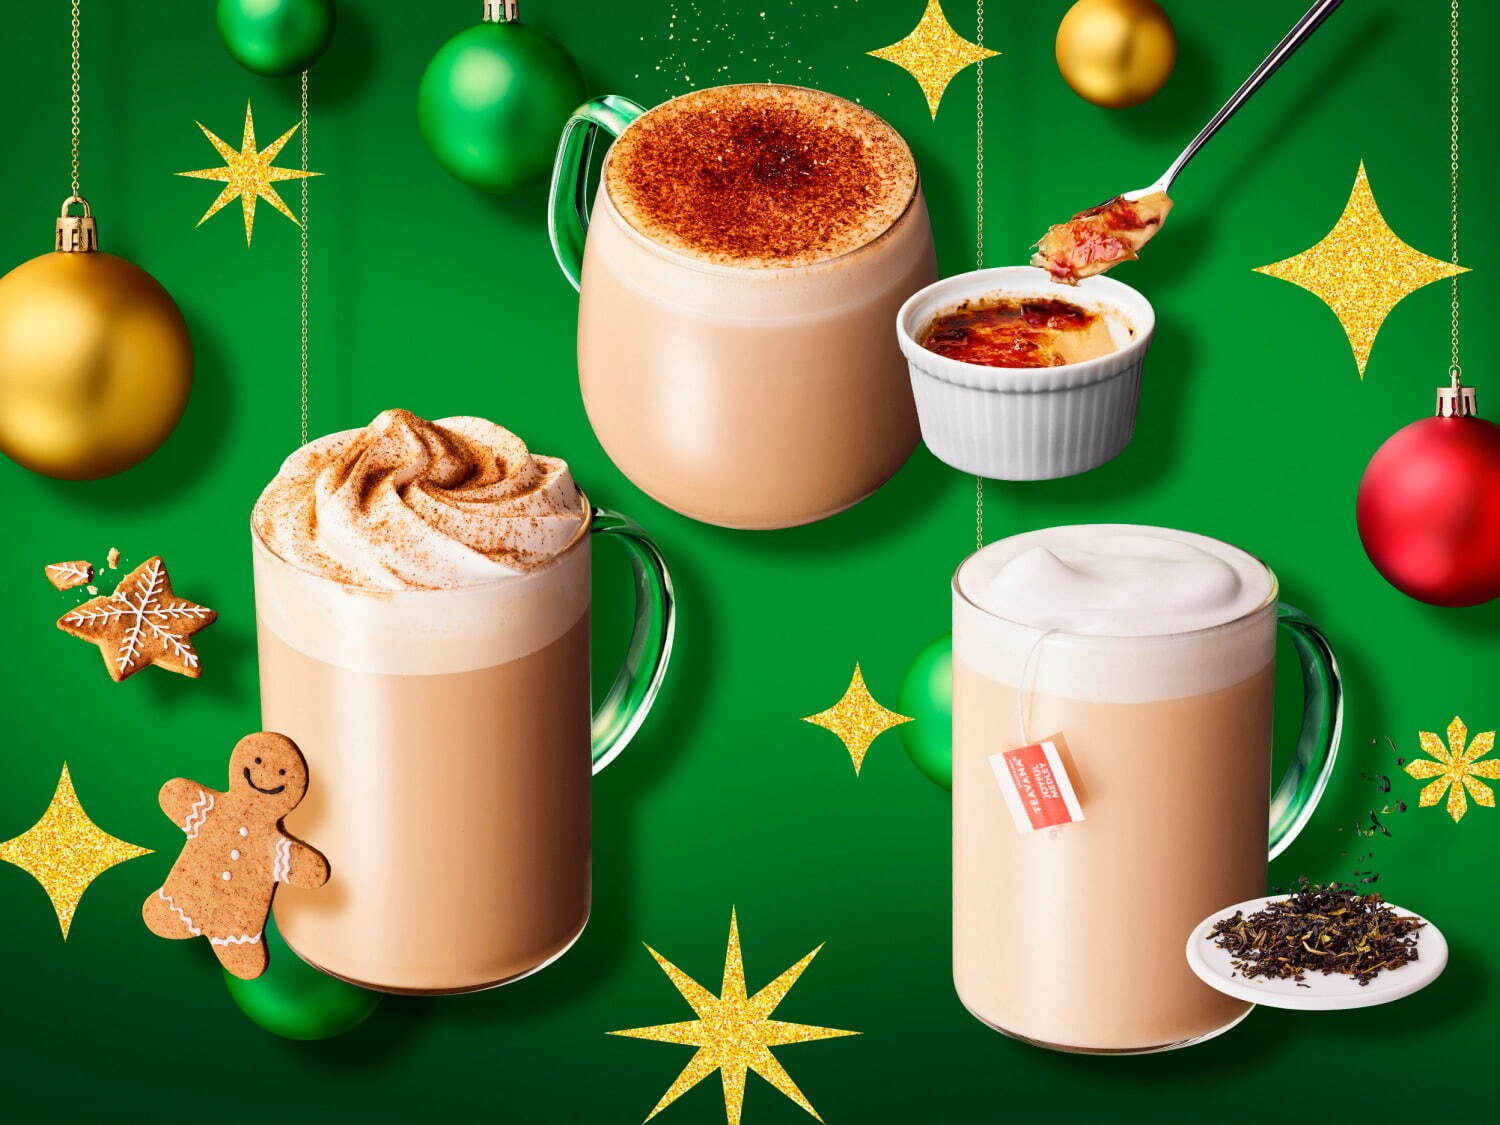 Starbucks Japan unveils new Christmas Frappuccino and drinks for the 2022 holiday season